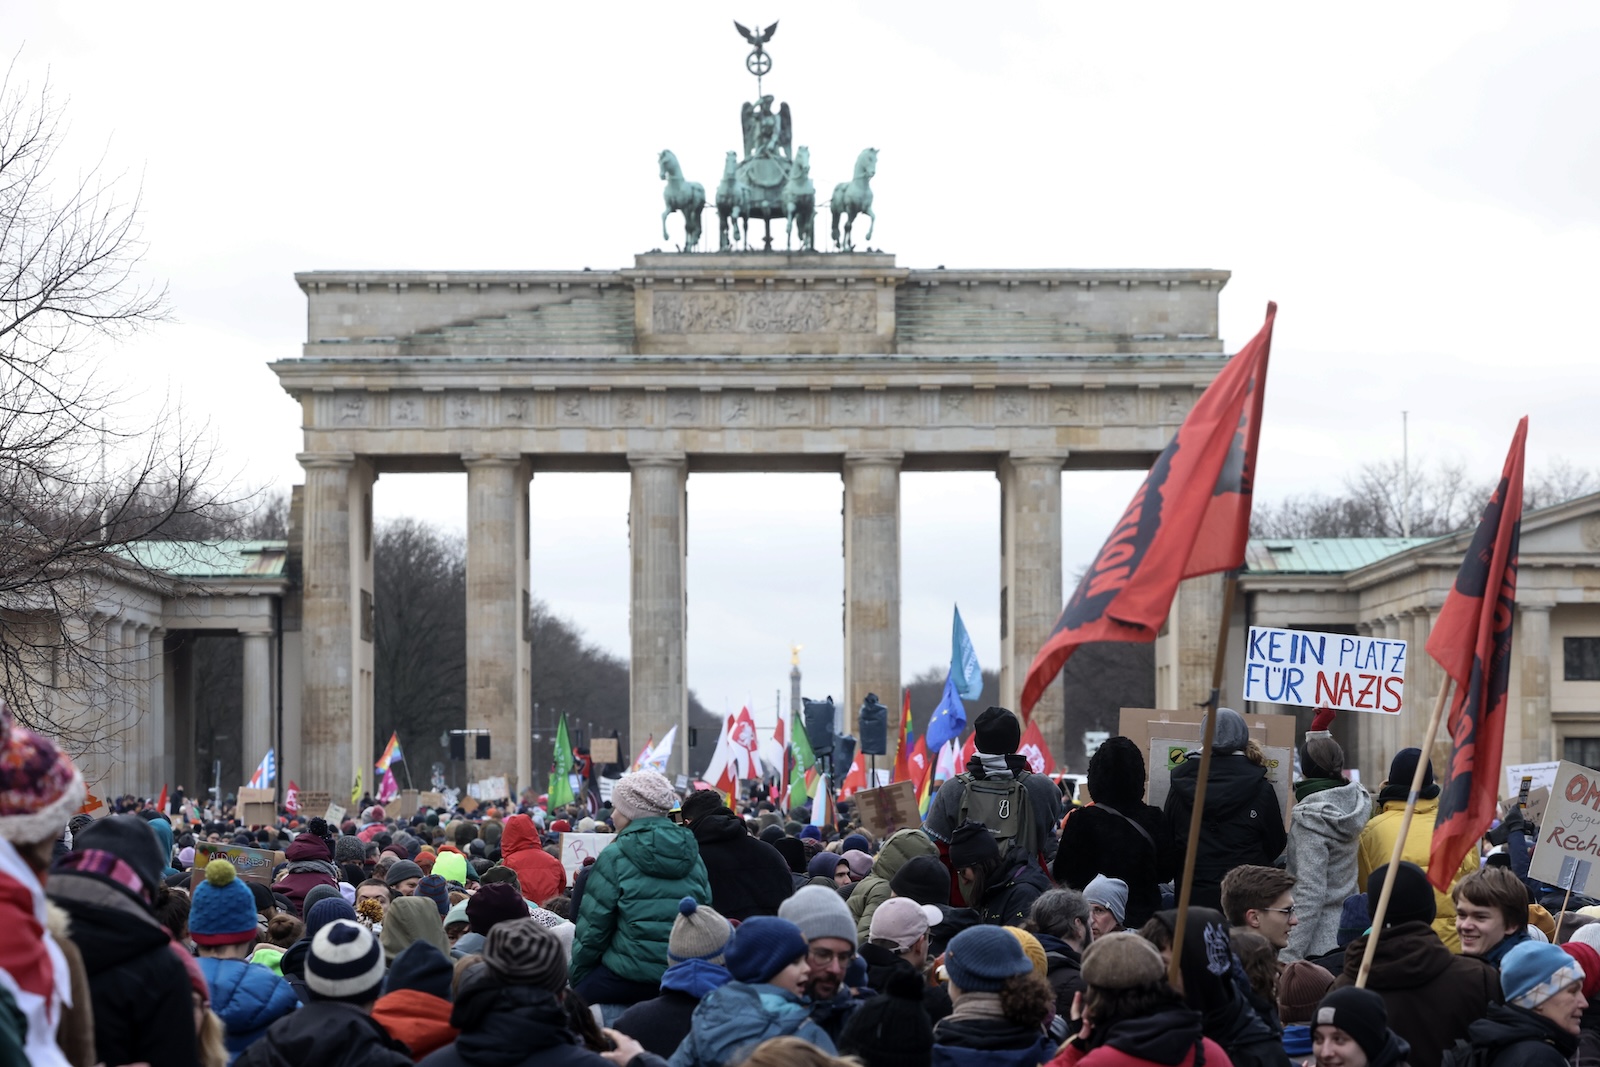 epa11076295 A protester holds a placard reading 'No place for Nazis' during a demonstration against the far-right Alternative for Germany (AfD) party in front of the Brandenburg Gate in Berlin, Germany, 14 January 2024. The protest held under the slogan 'Defend Democracy', was organized by the Fridays for Future movement, along with other non-governmental organizations, as a reaction to revelations of the investigative journalism group Correctiv, and their report about a meeting of far-right politicians, who allegedly discussed deportation plans referred to as 'remigration', a term promoting the forced return of 'migrants' to their place of origin.  EPA/CLEMENS BILAN